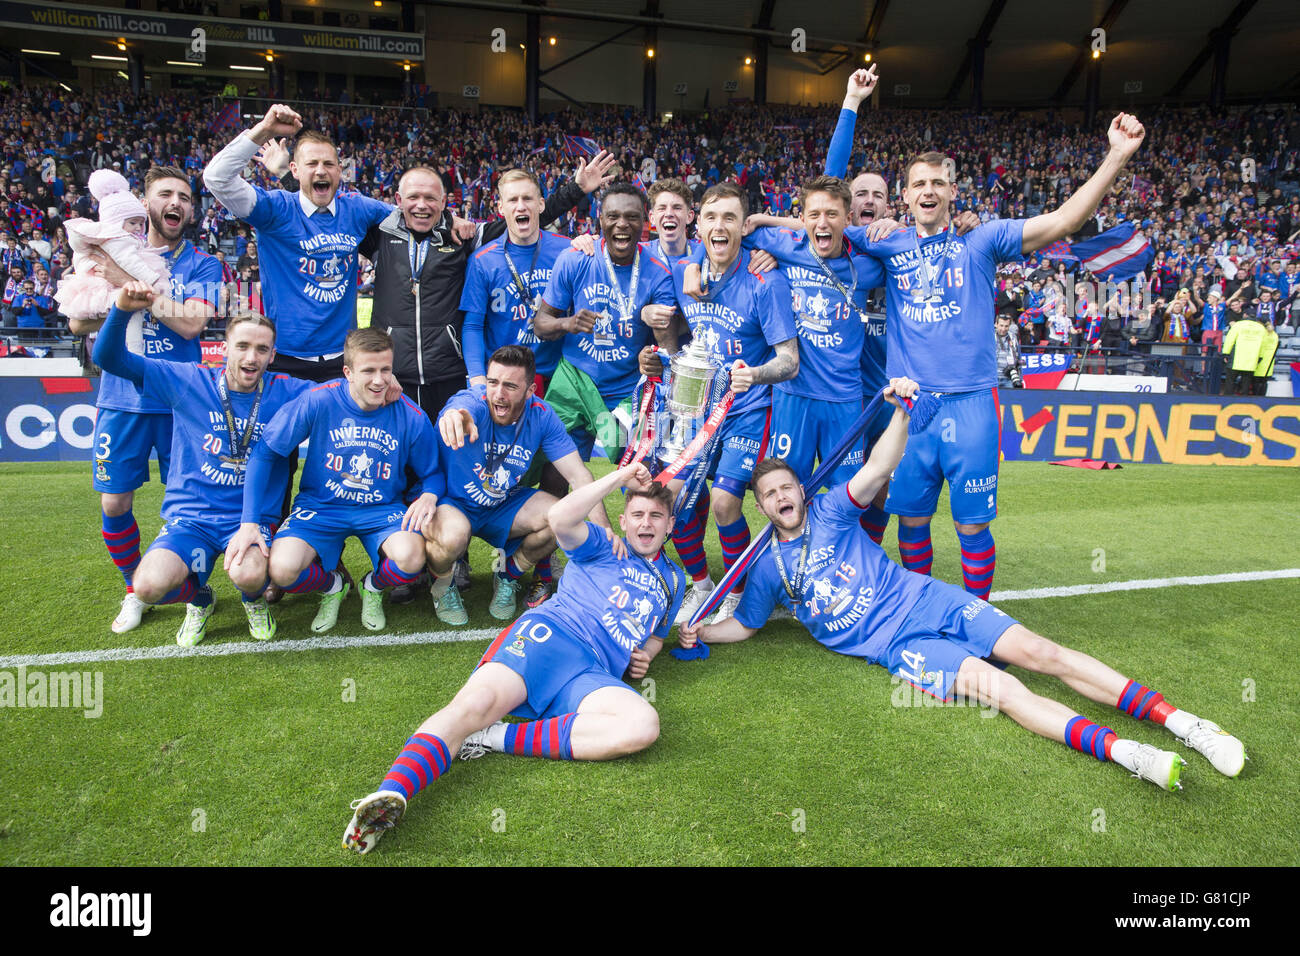 Inverness celebrate winning the William Hill Scottish Cup Final at Hampden Park, Glasgow. PRESS ASSOCIATION Photo. Picture date: Saturday May 30, 2015. See PA story SOCCER Scottish Cup. Photo credit should read: Jeff Holmes/PA Wire. Stock Photo